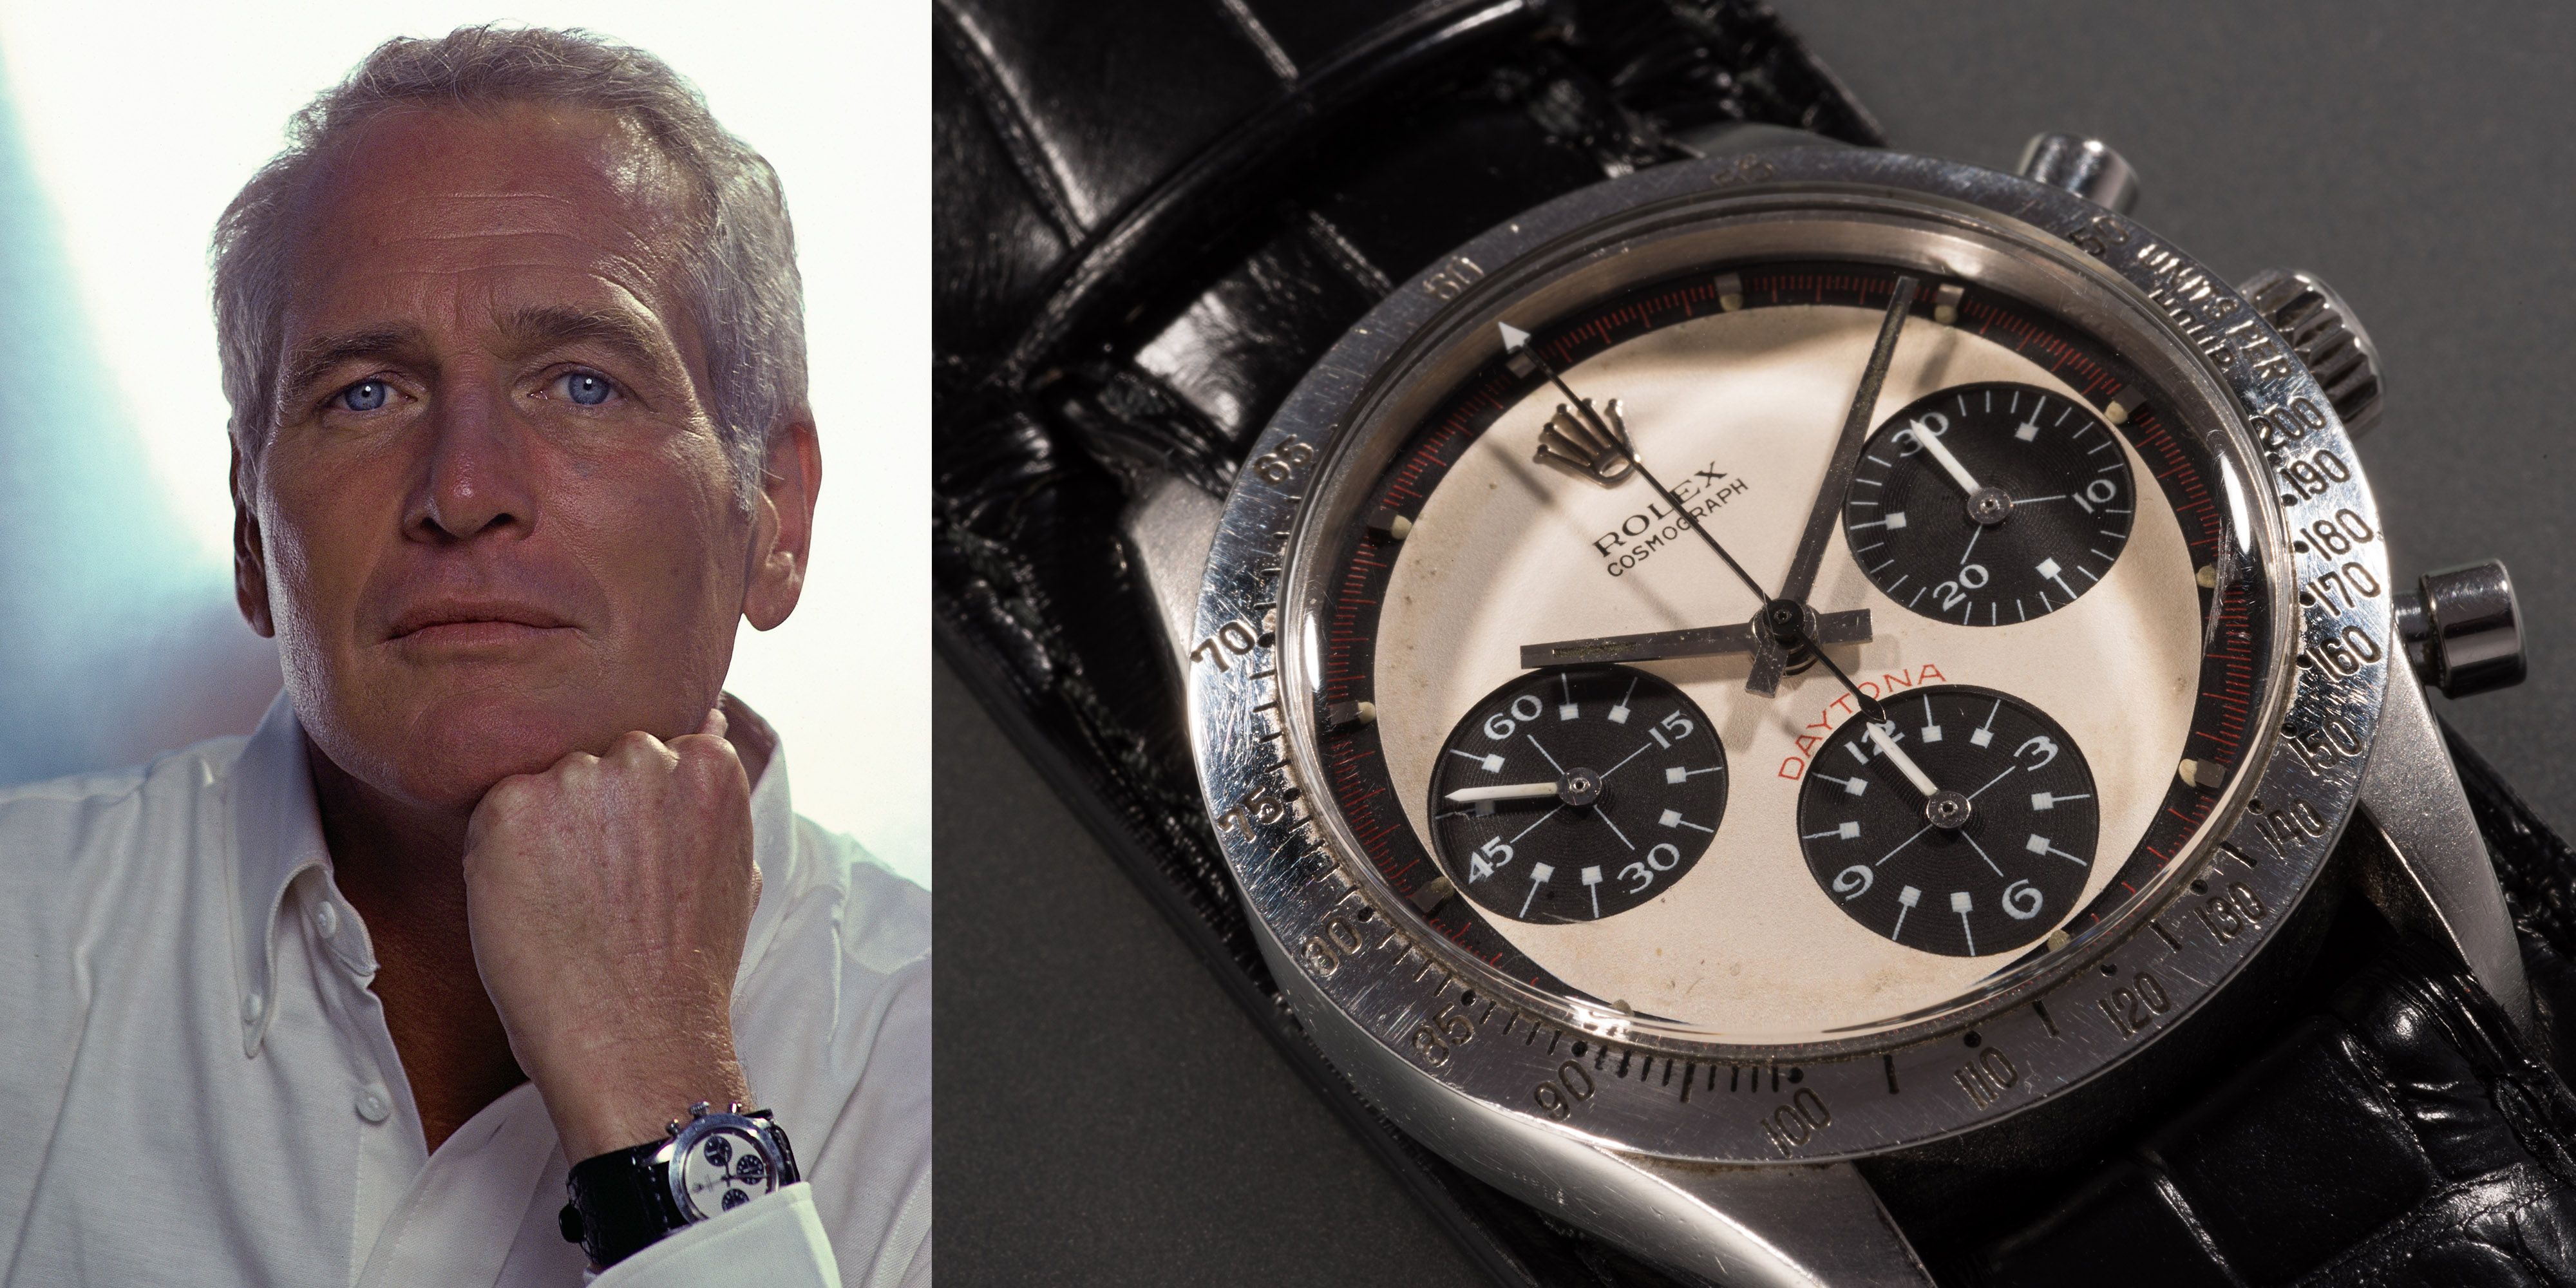 Paul Newman's Rolex Daytona Watch Sells For $17.8 Million At Auction - Most  Expensive Watch Sold at Auction